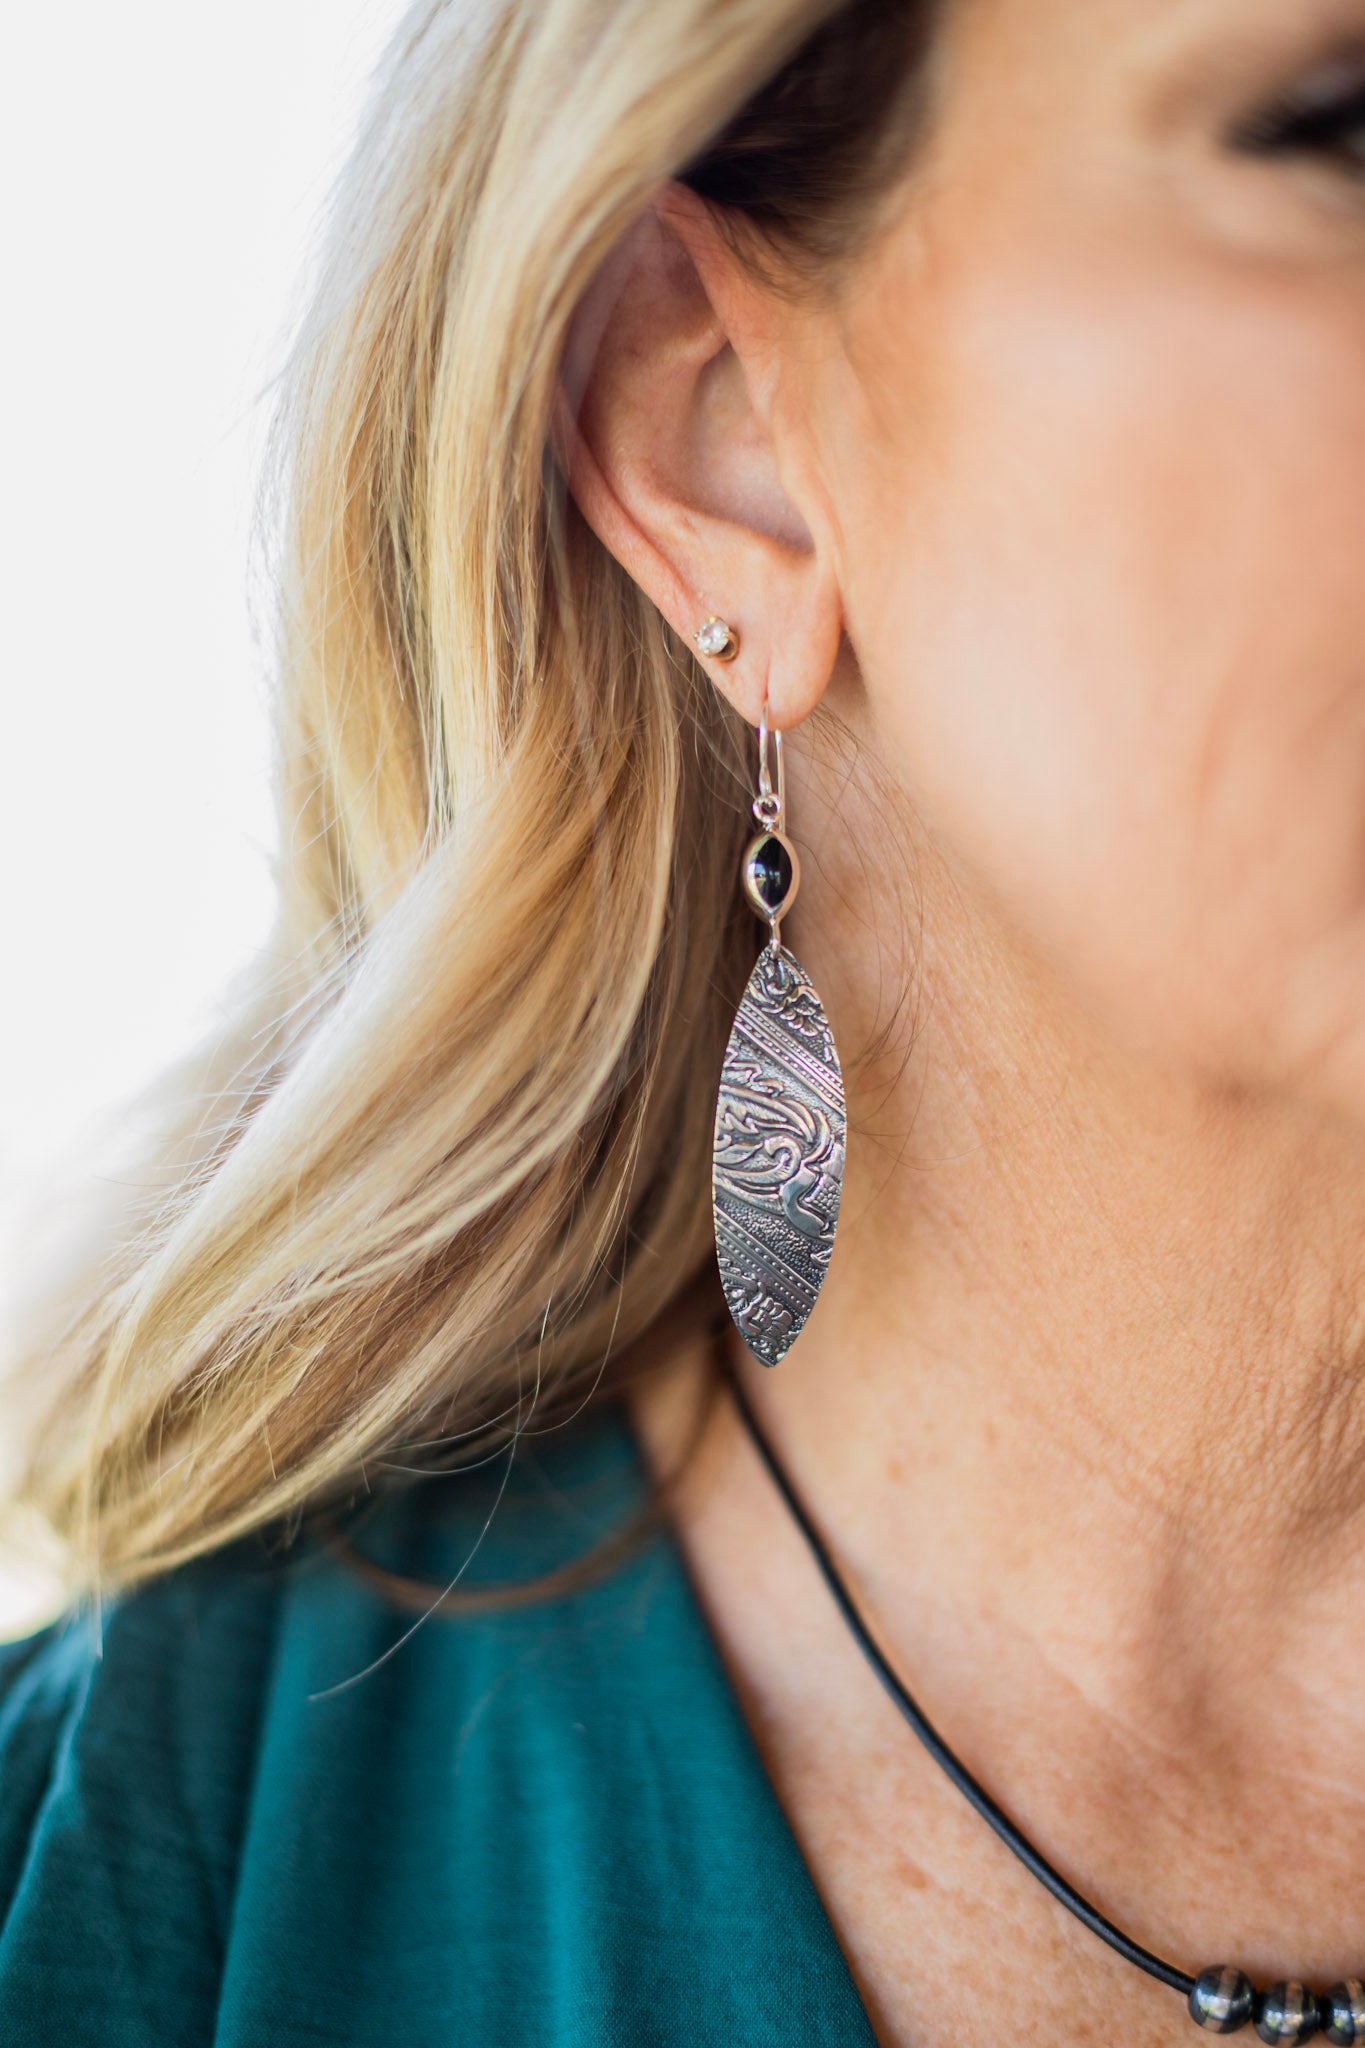 The Acton Earrings